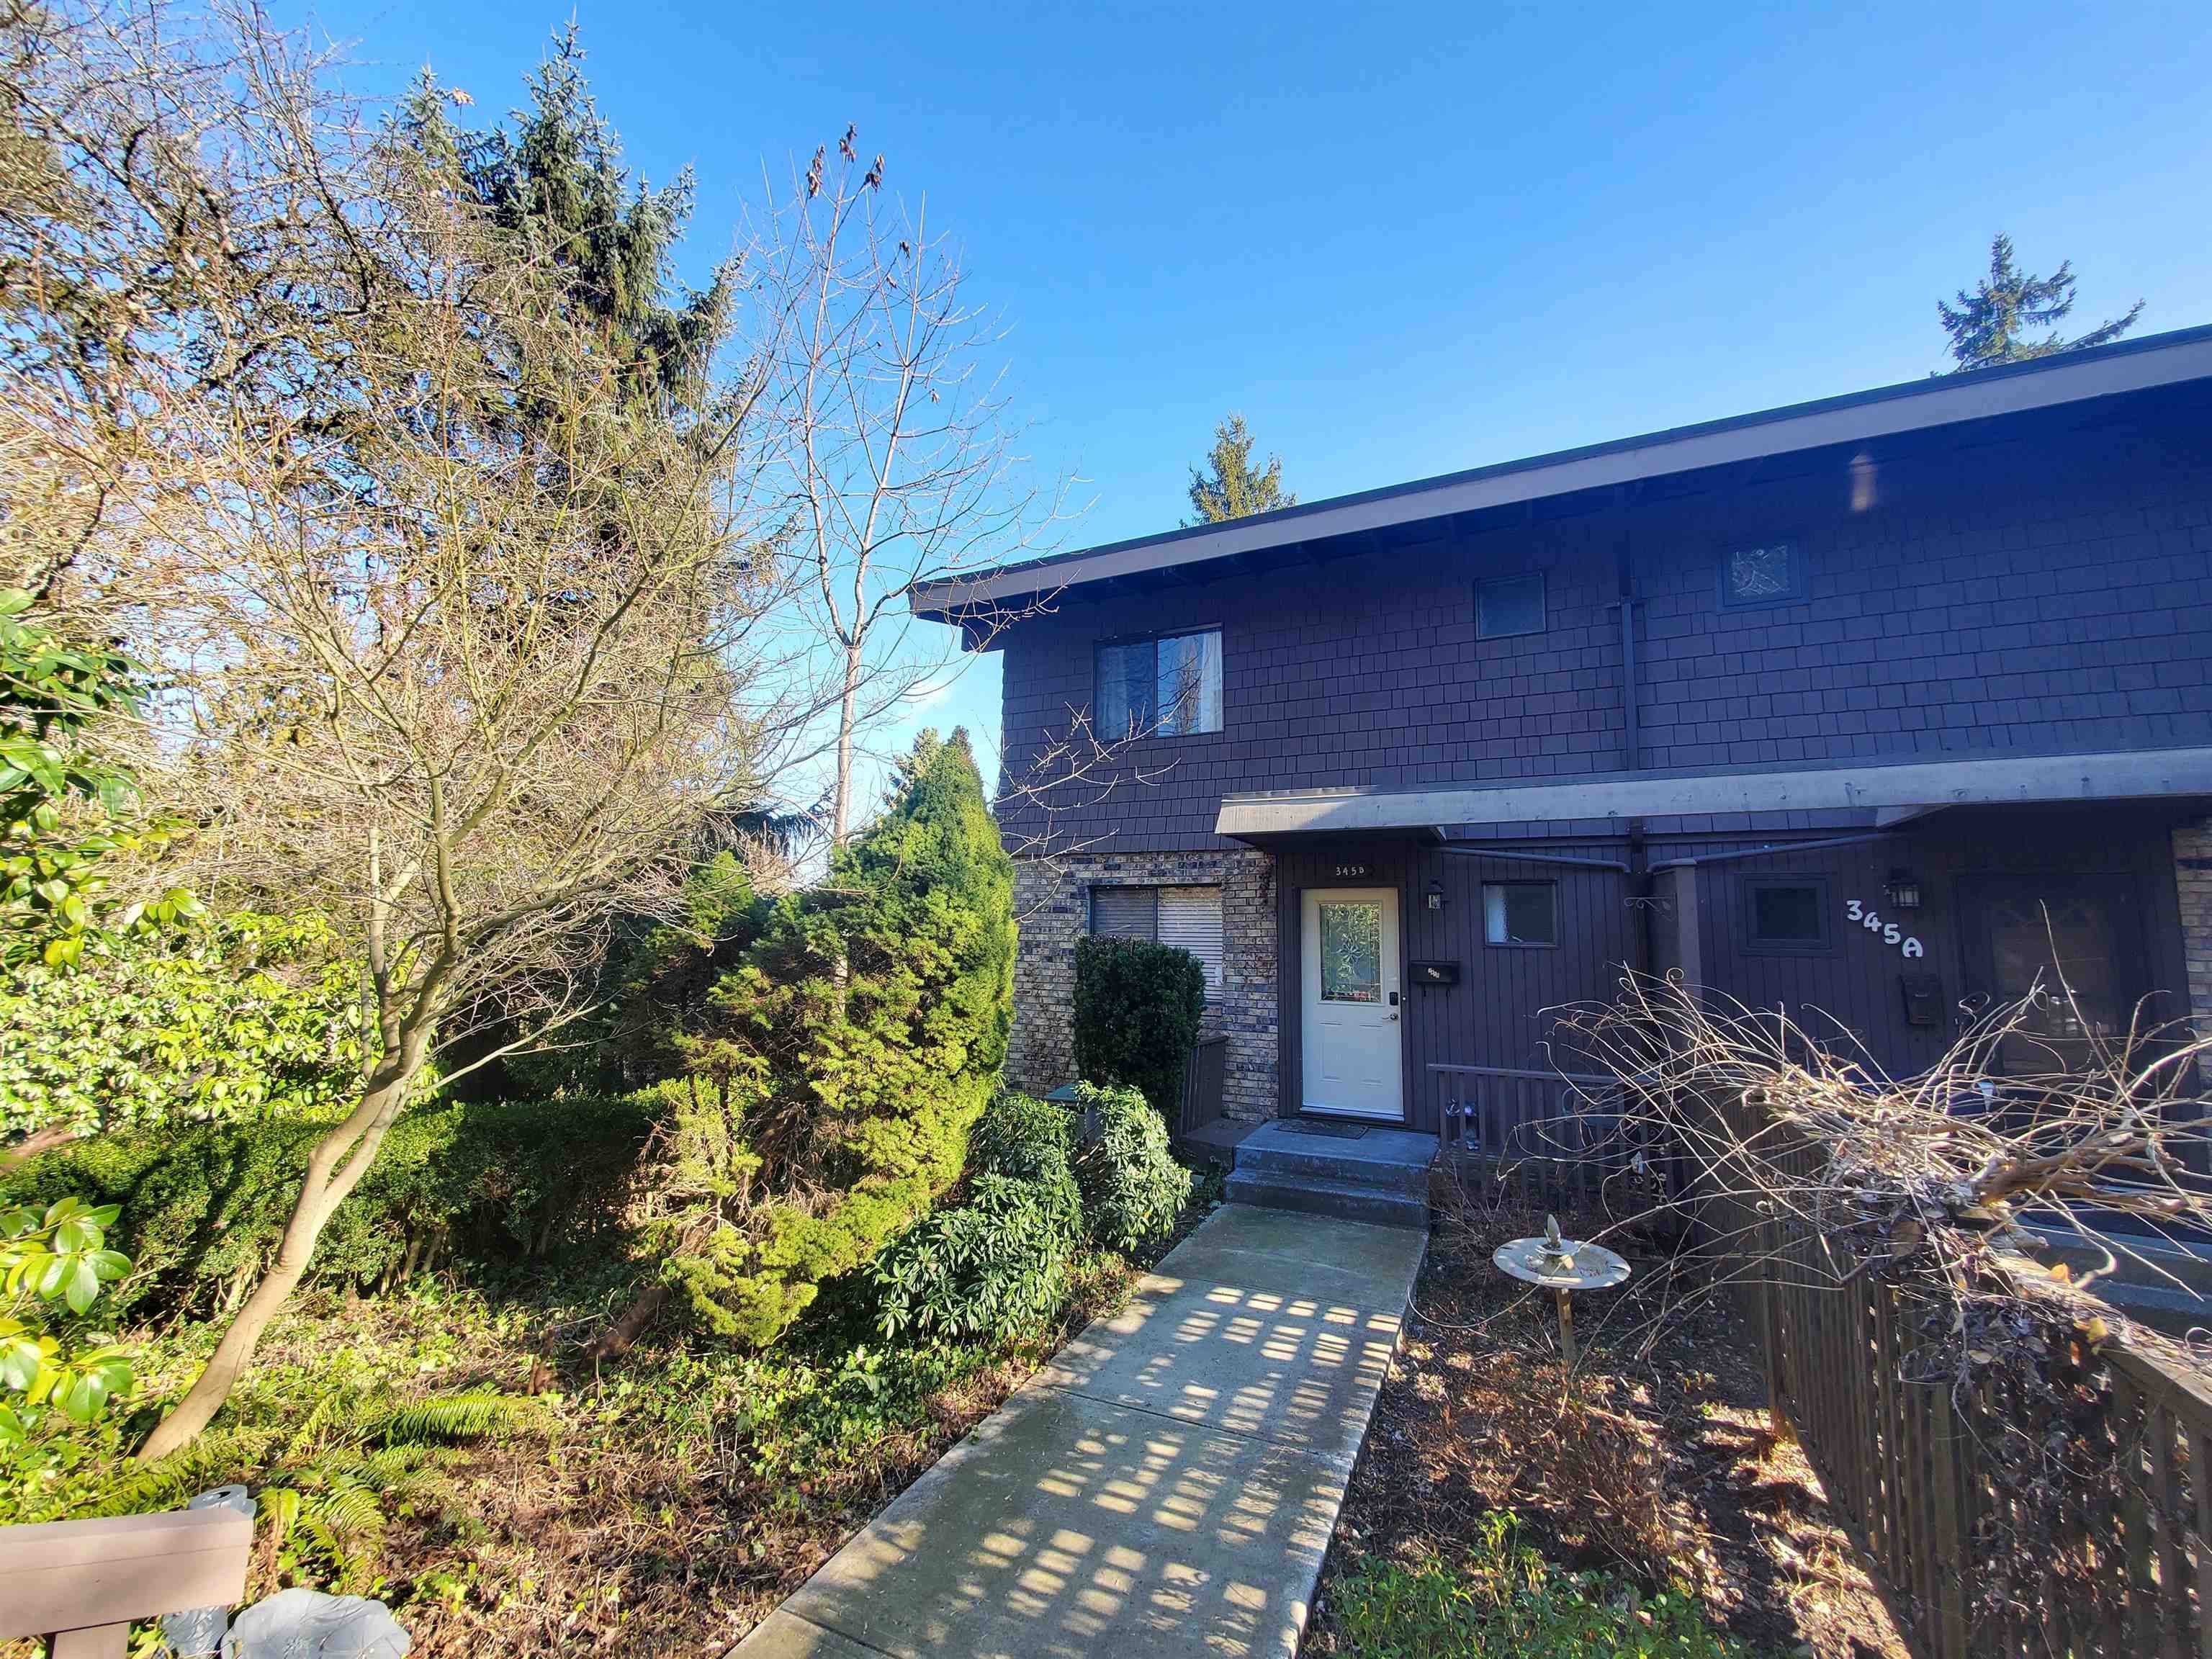 I have sold a property at 345B EVERGREEN DR in Port Moody
